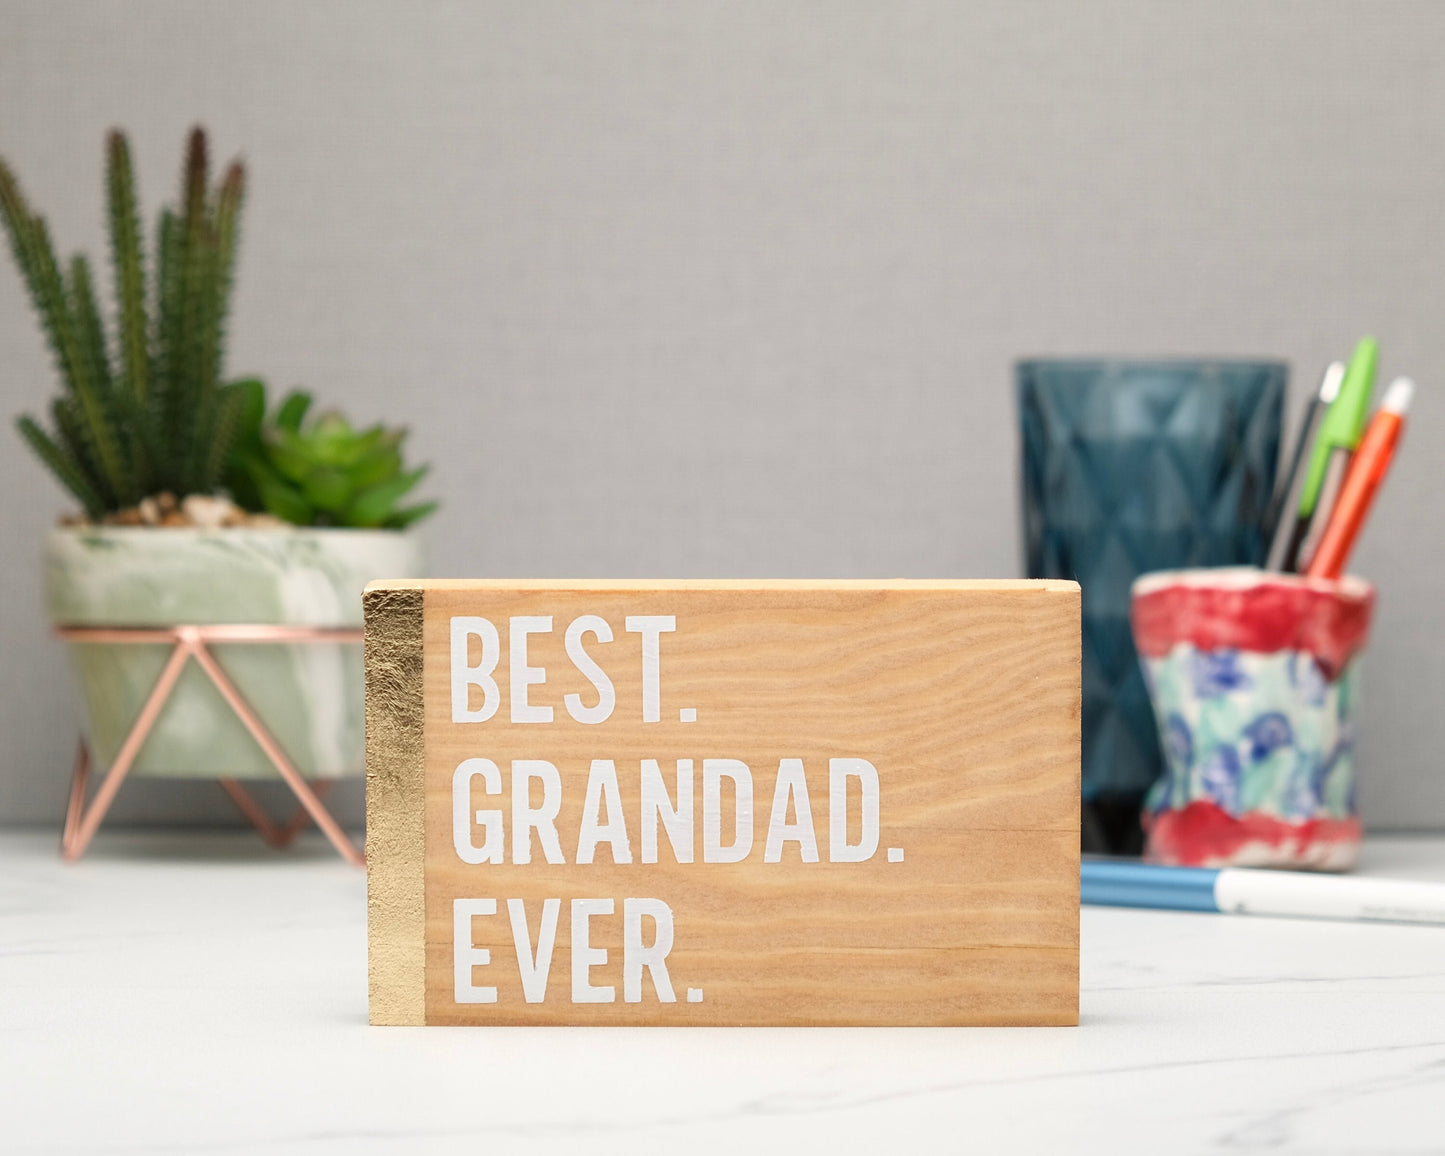 Best Grandad Grandpa Ever Personalized Wood Block Sign, Best Dad Ever, Handmade Wooden Dad Gift, Self Care Inspirational Quotes, Birthday